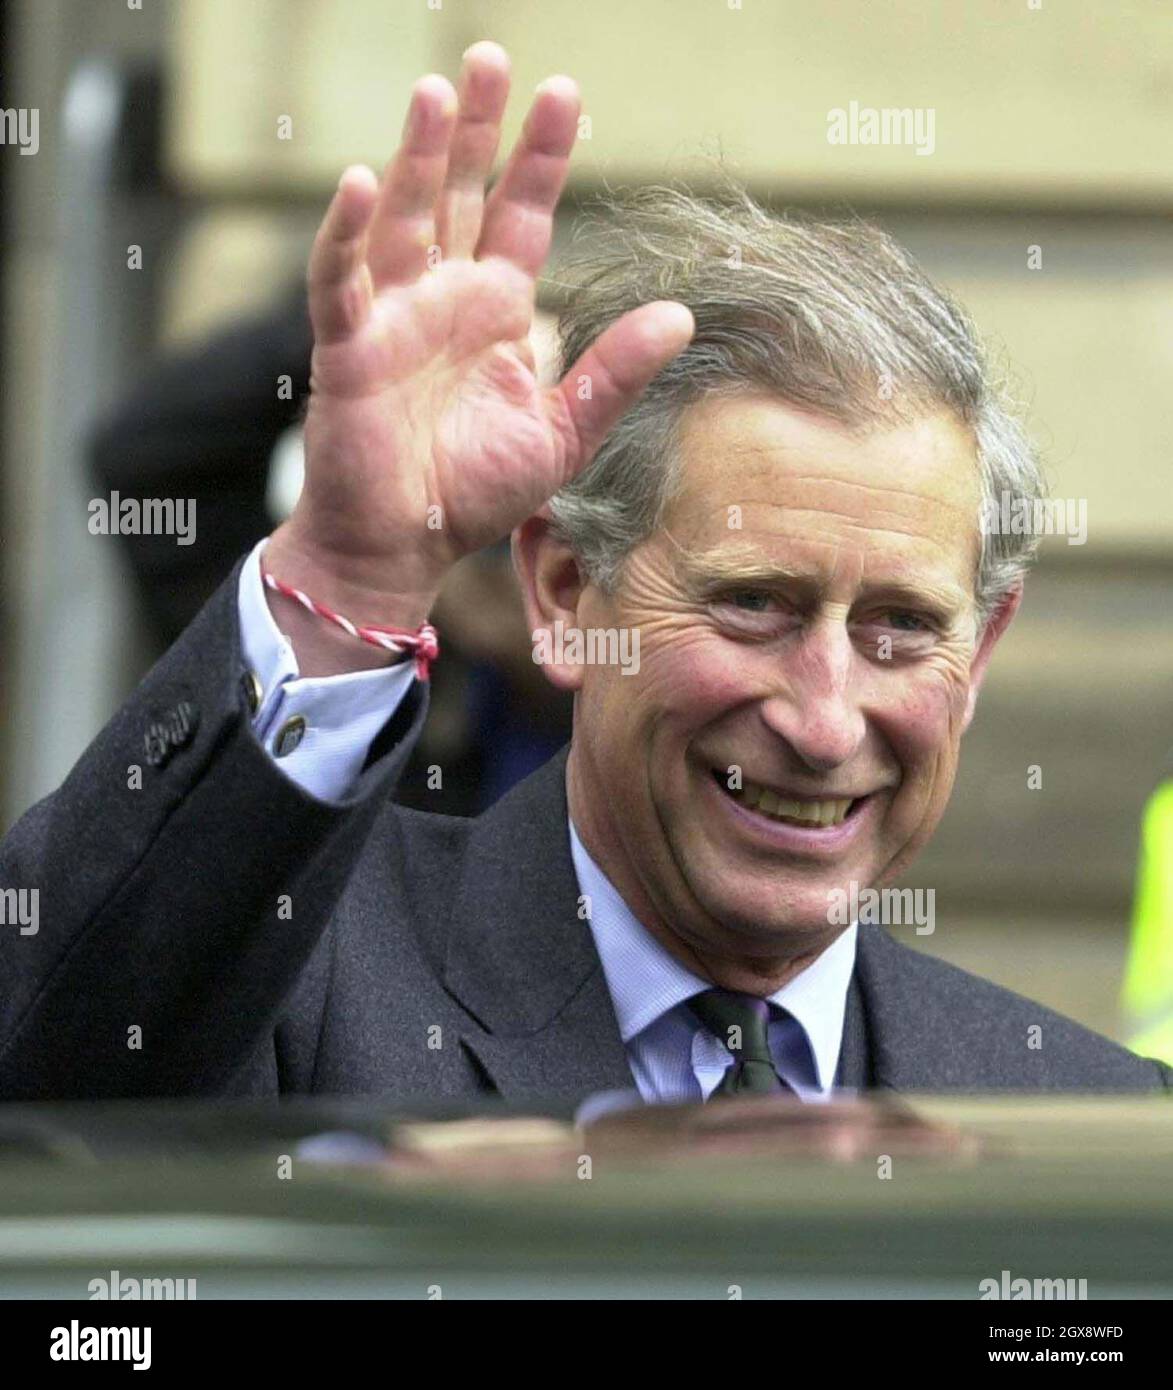 The Prince of Wales leaves the real Mary Kings Close at the Royal Mile, Edinburgh. The Prince of Wales visited some of Scotland's top visitor attractions in a bid to raise the profile of the country's tourism industry.  Â©Anwar Hussein/allaction.co.uk  Stock Photo